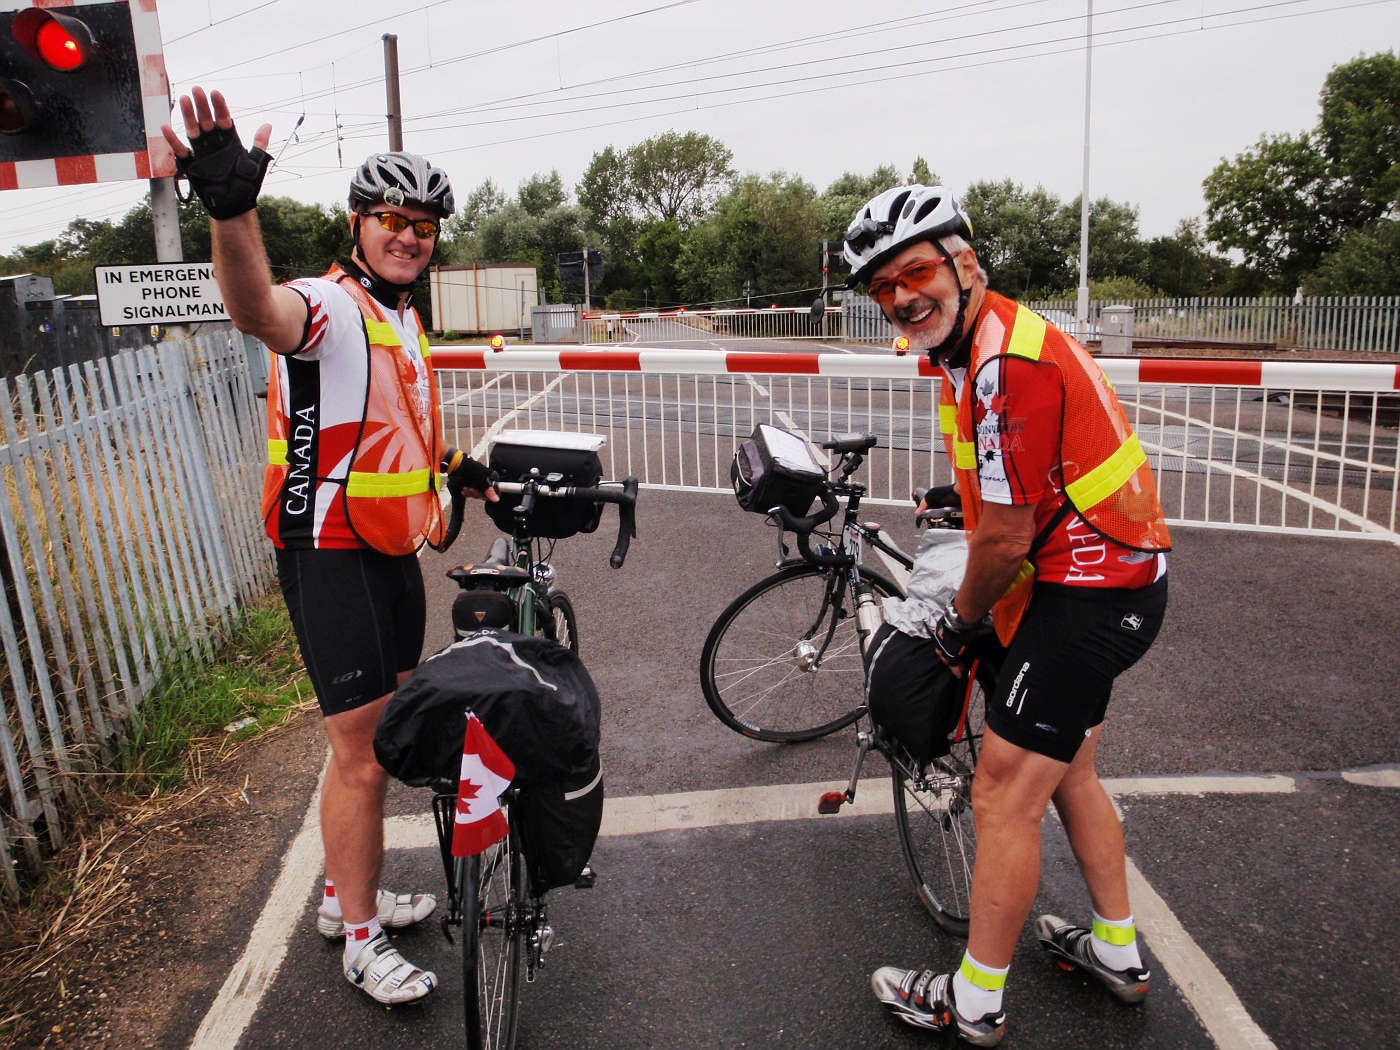 Canadian riders at railway crossing gate